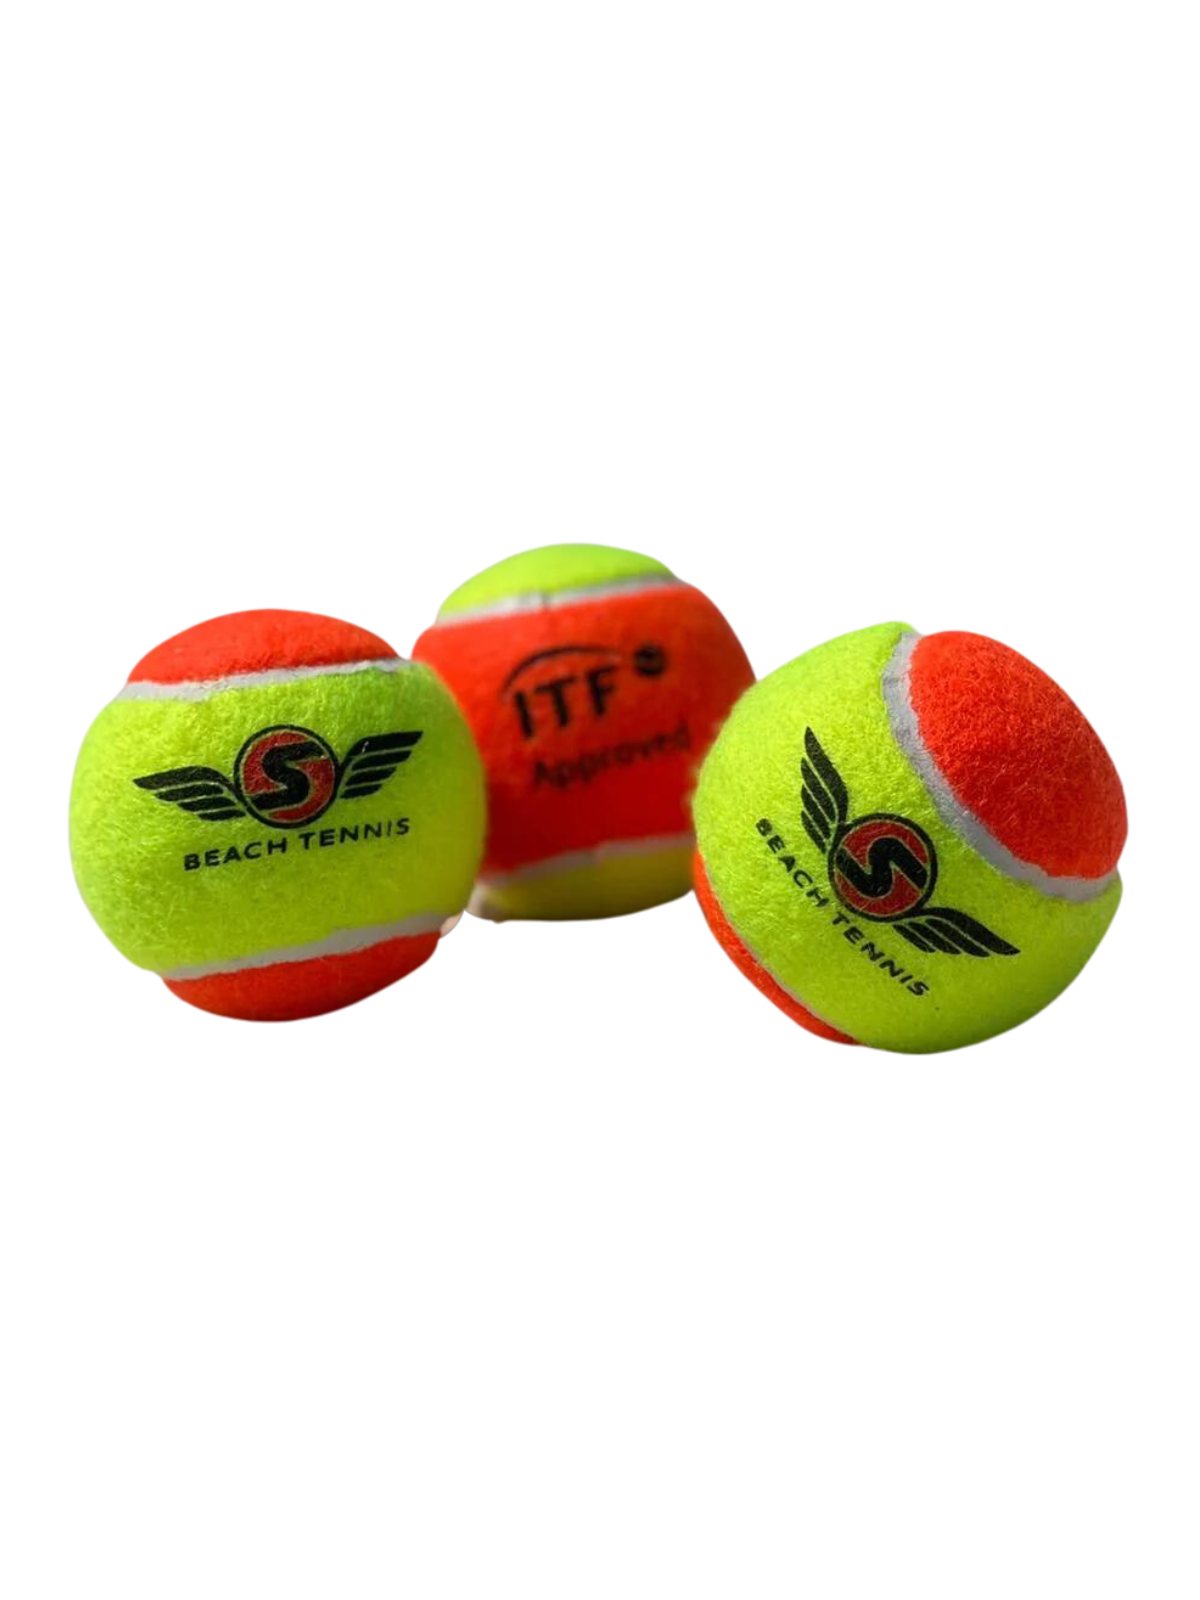 SEXY Brand - The Original S Ball (ITF Approved)